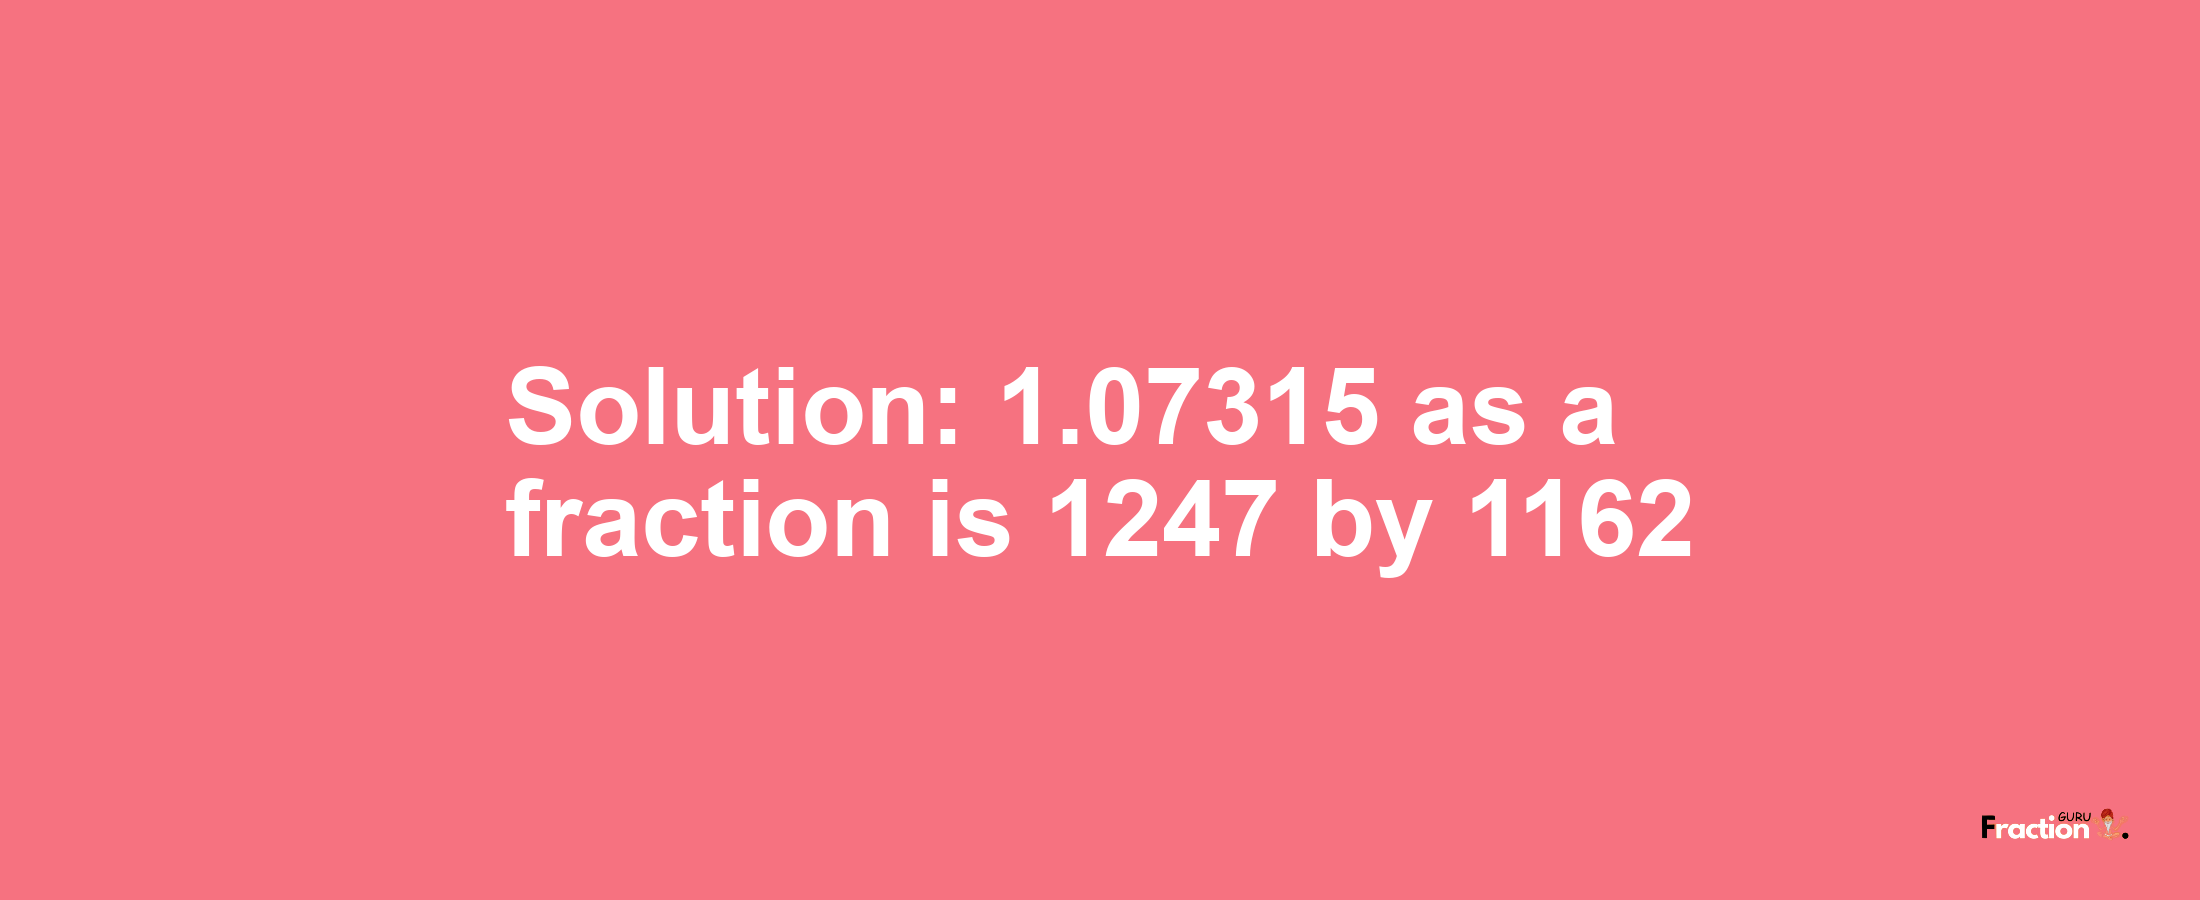 Solution:1.07315 as a fraction is 1247/1162